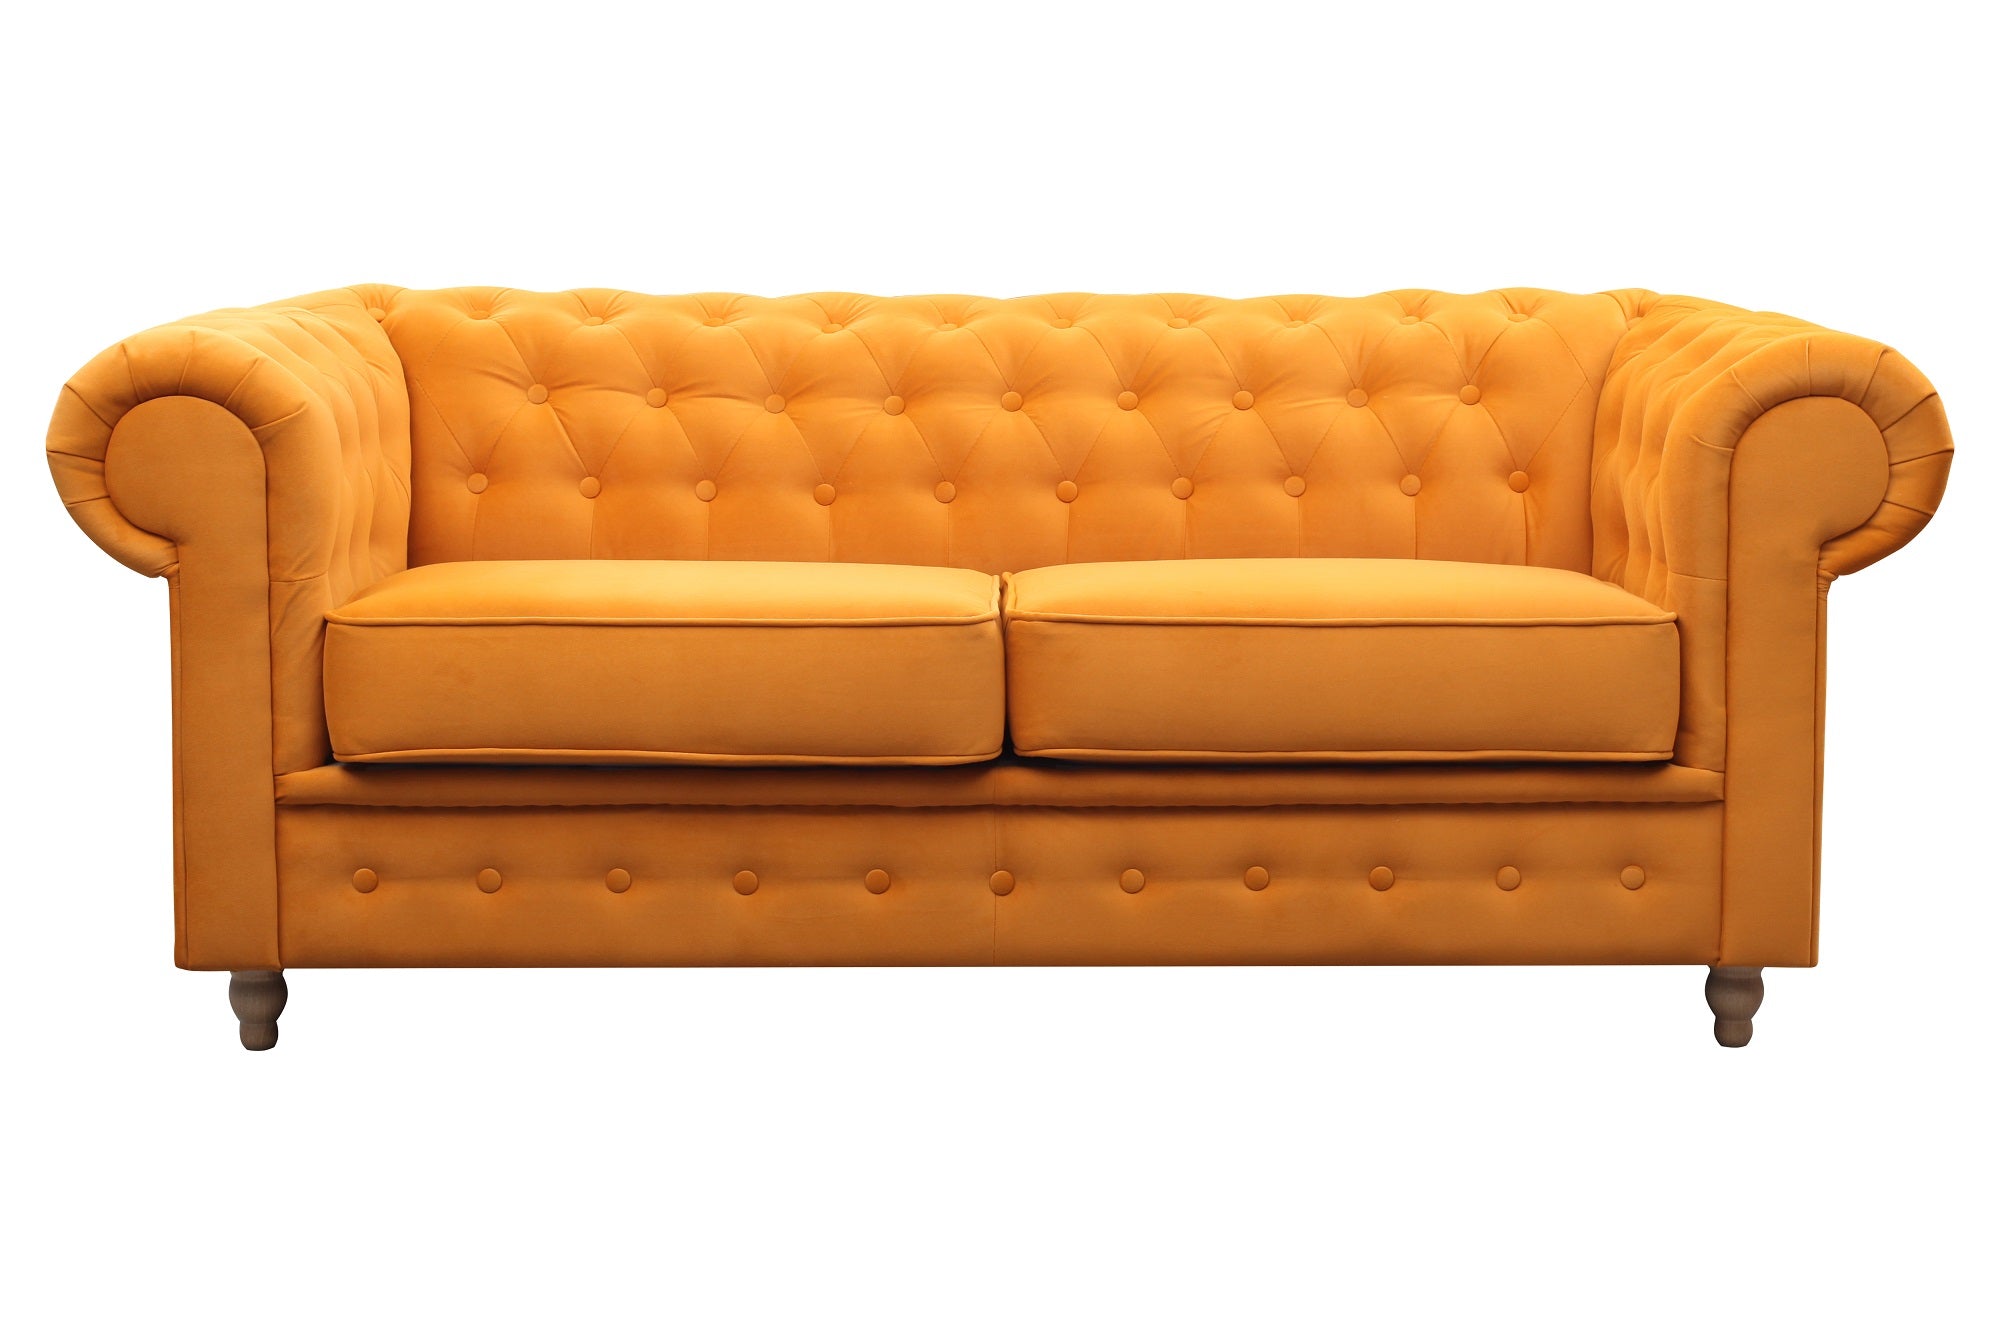 Sofa bed-Imperial